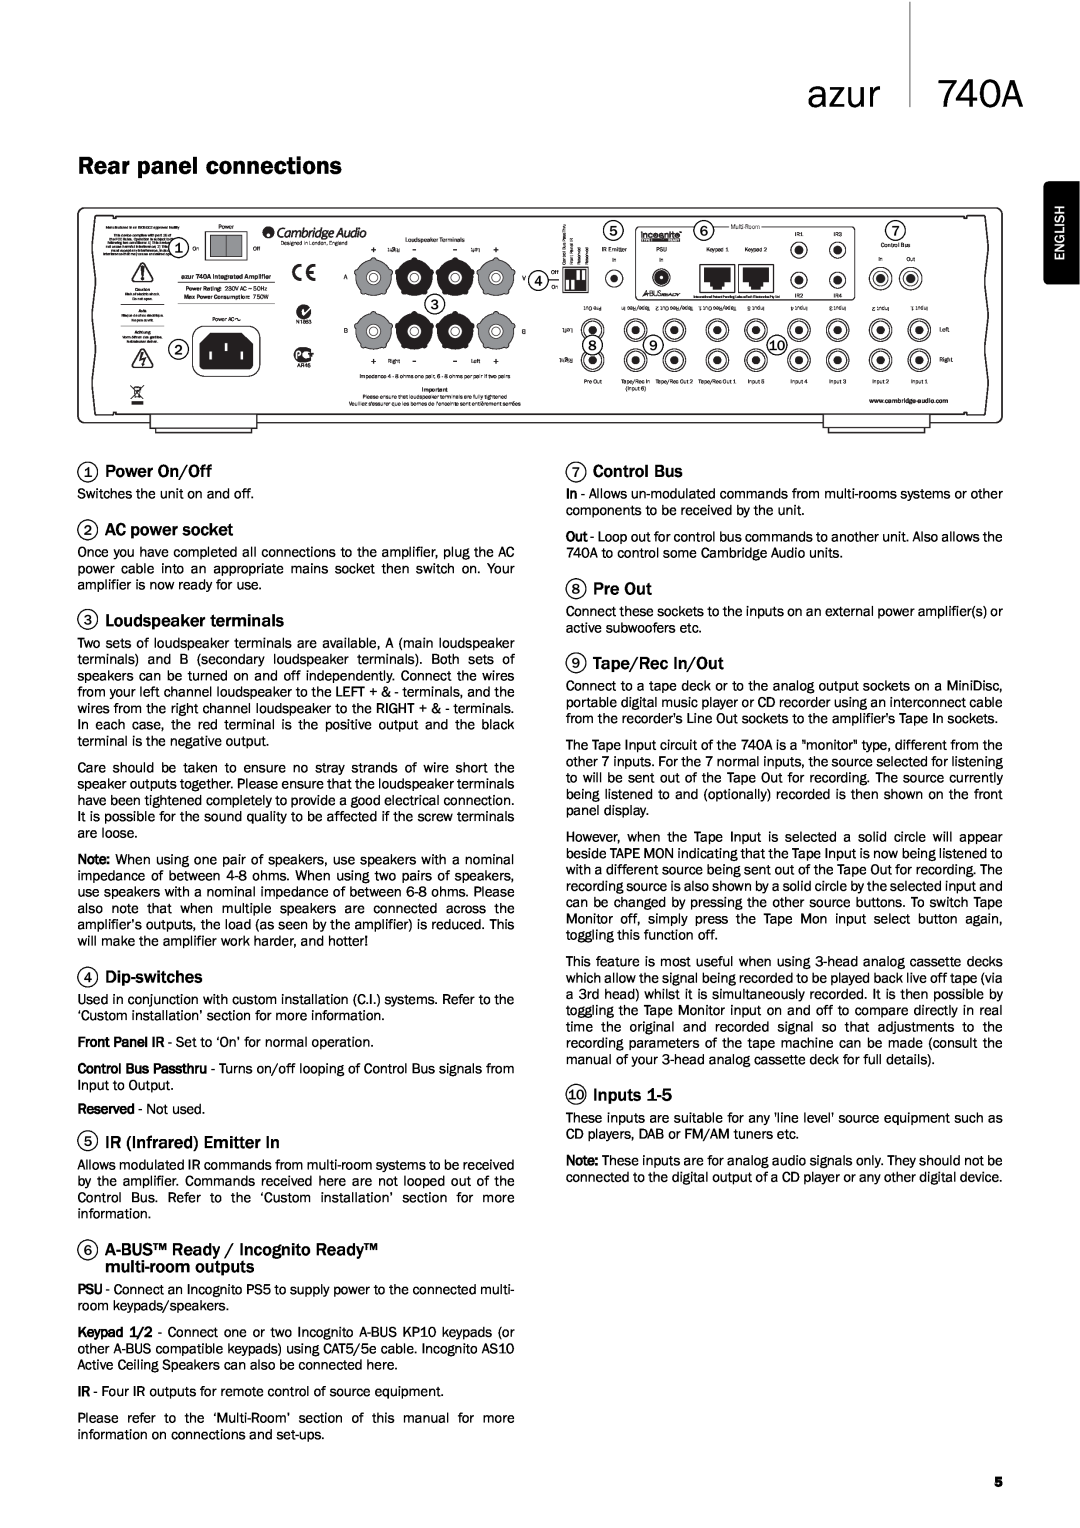 Genius user manual Rear panel connections, azur 740A 